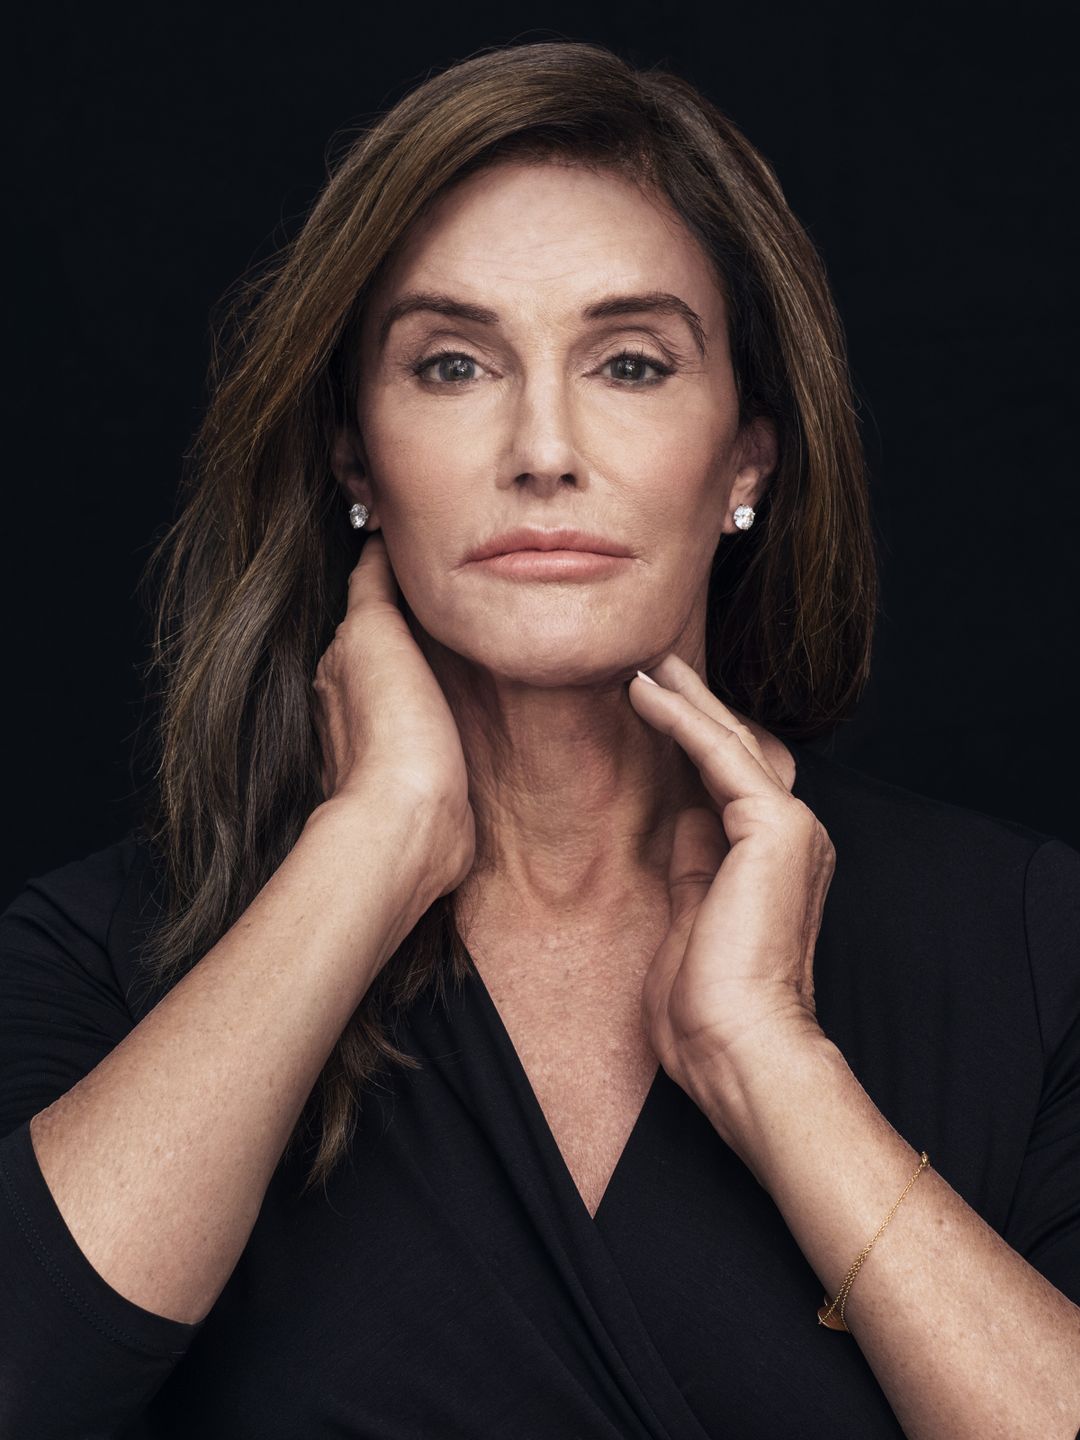 Caitlyn Jenner in real life